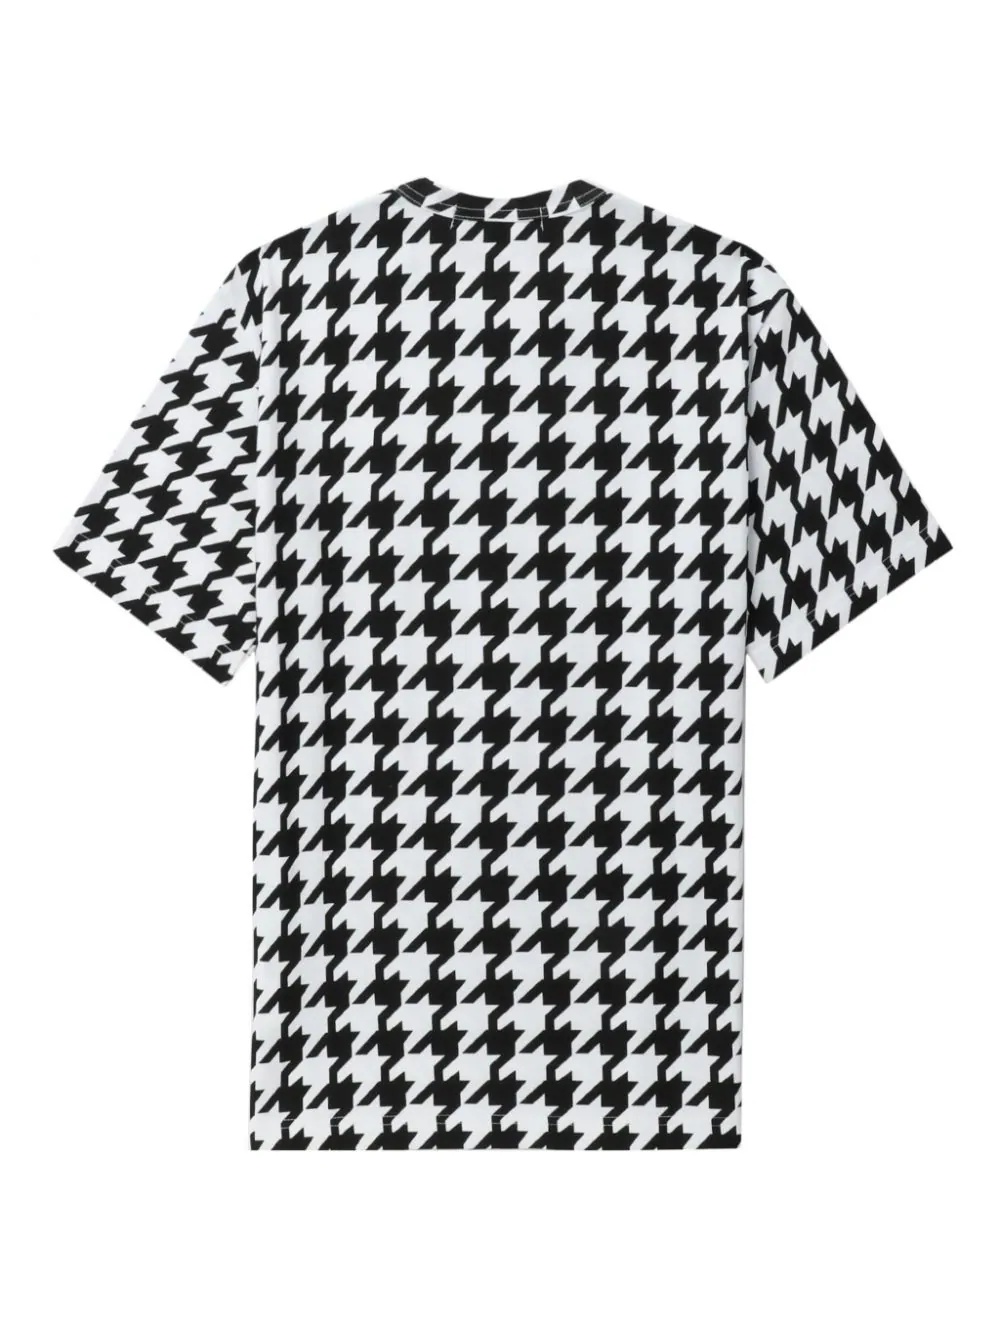 Houndstooth Pattern Tee - 2